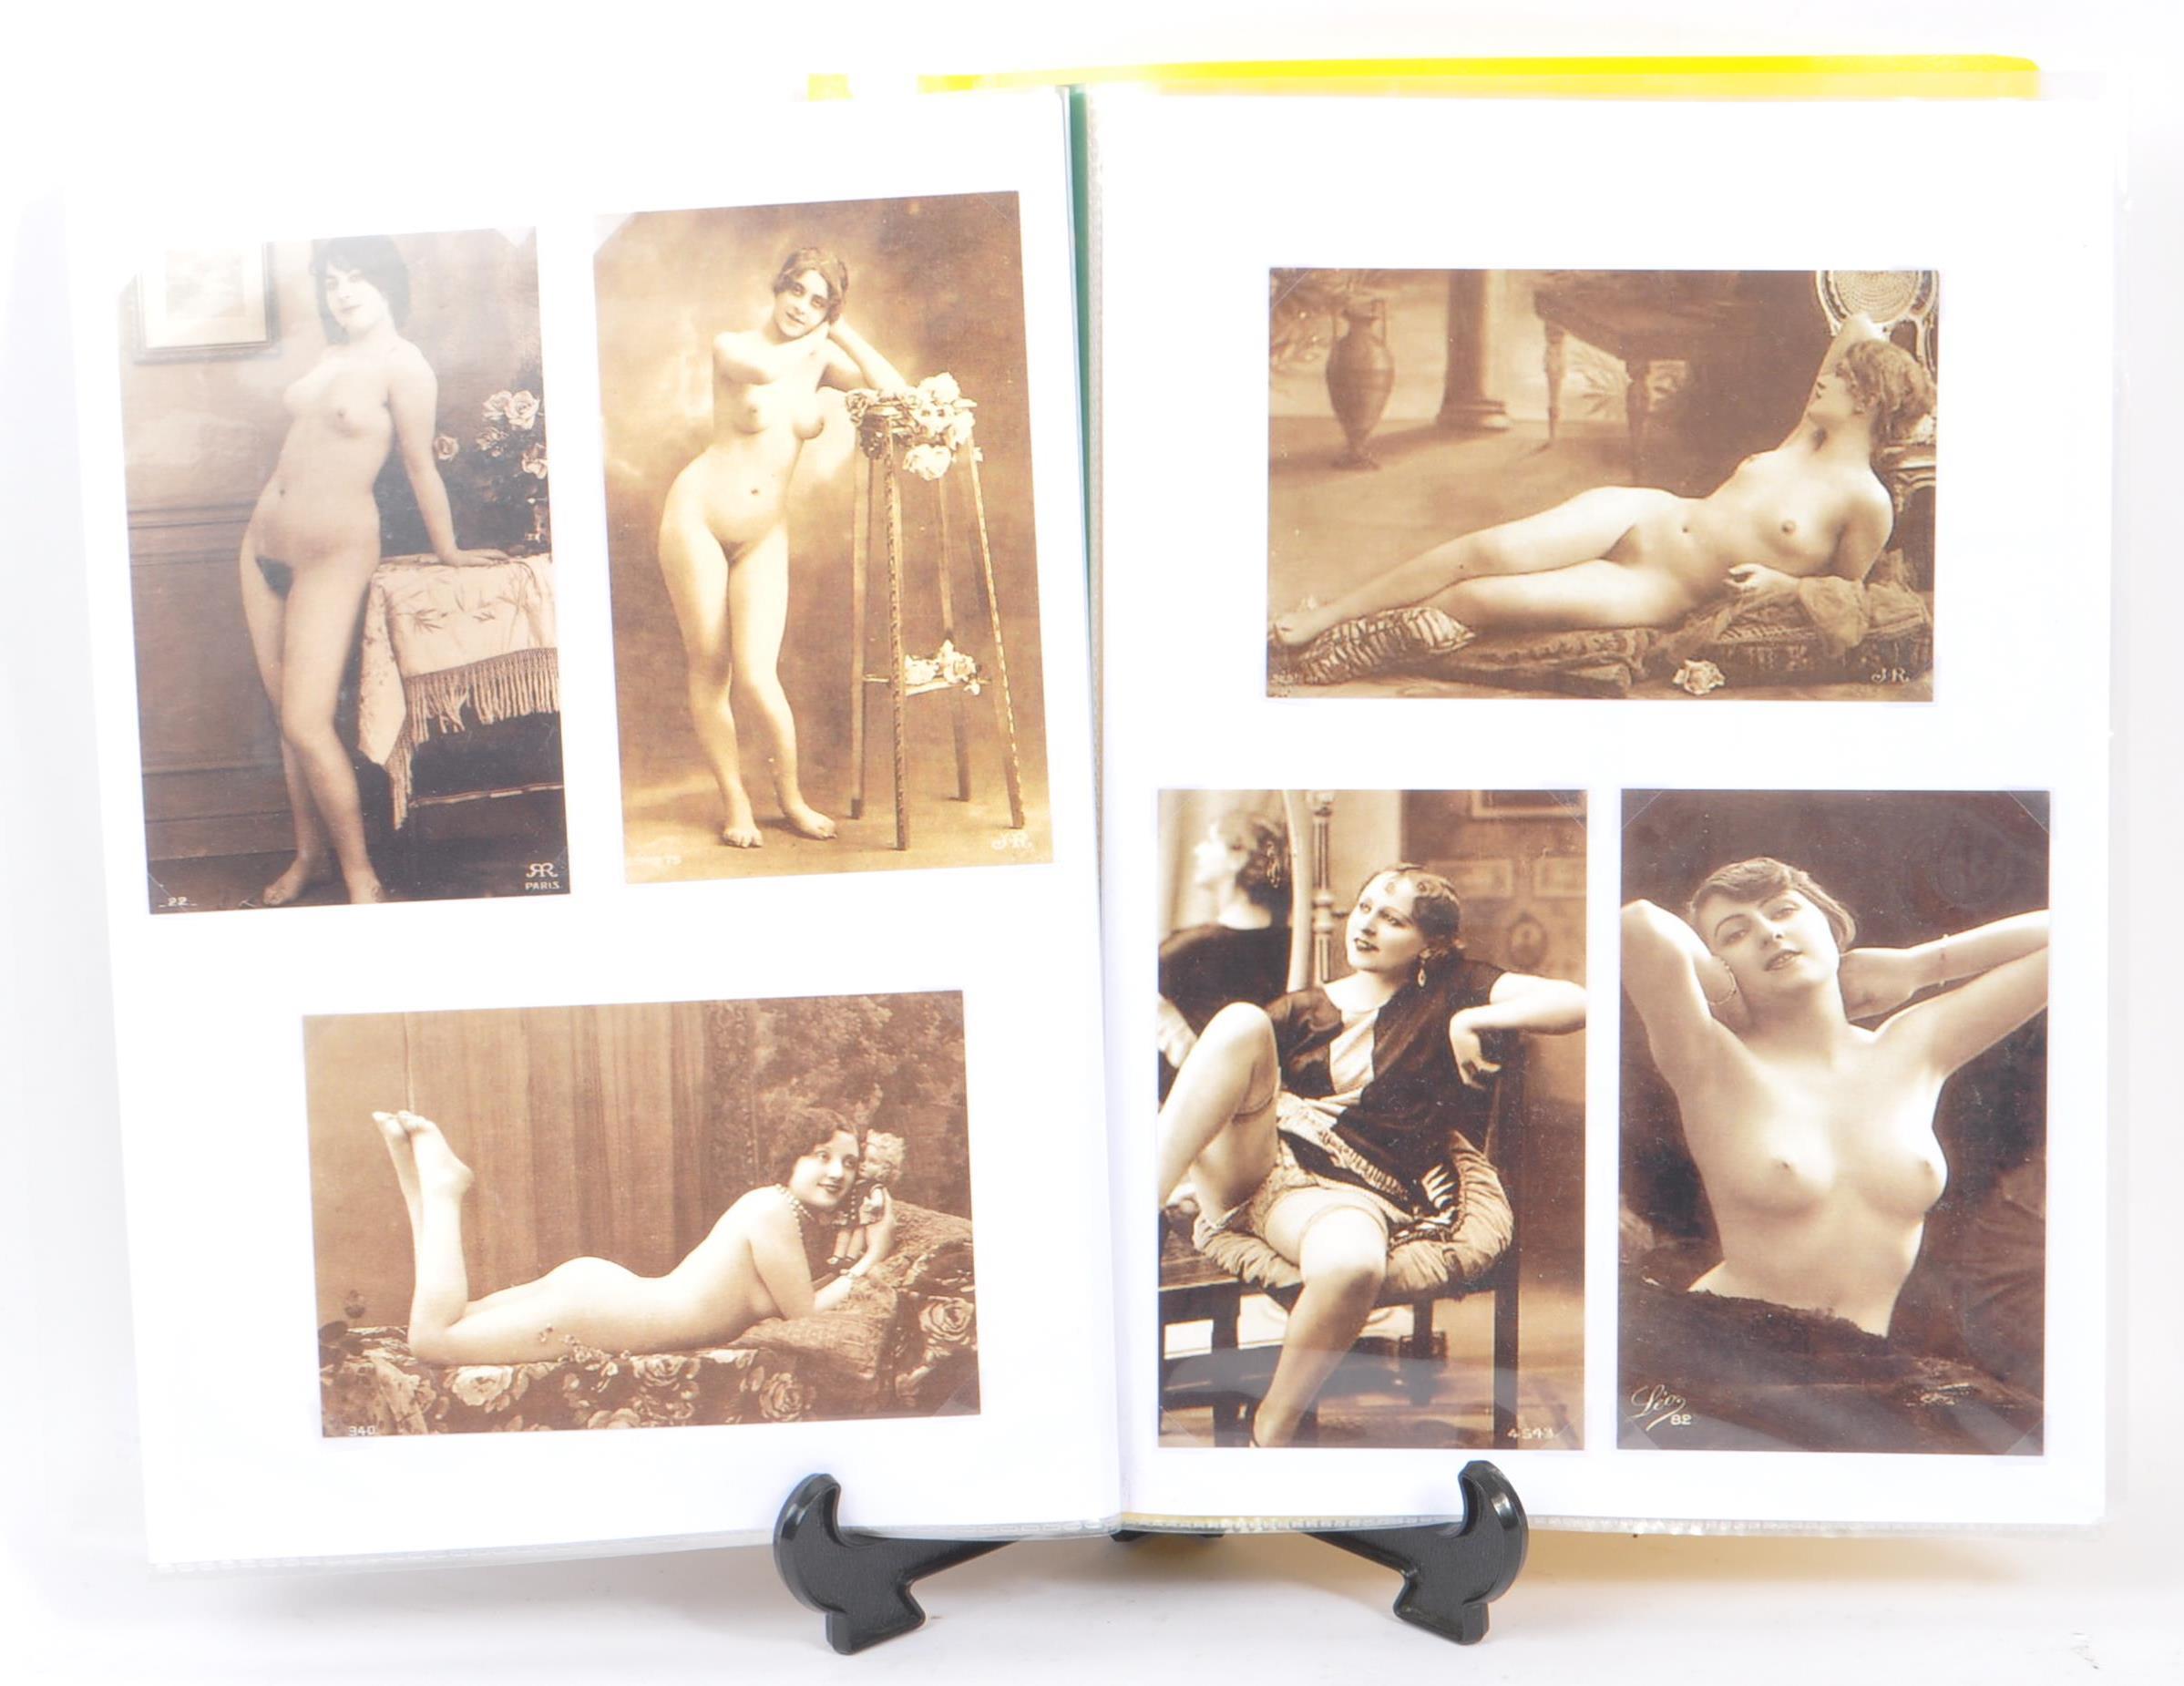 COLLECTION OF 20TH CENTURY FRENCH EROTIC NUDE POSTCARDS